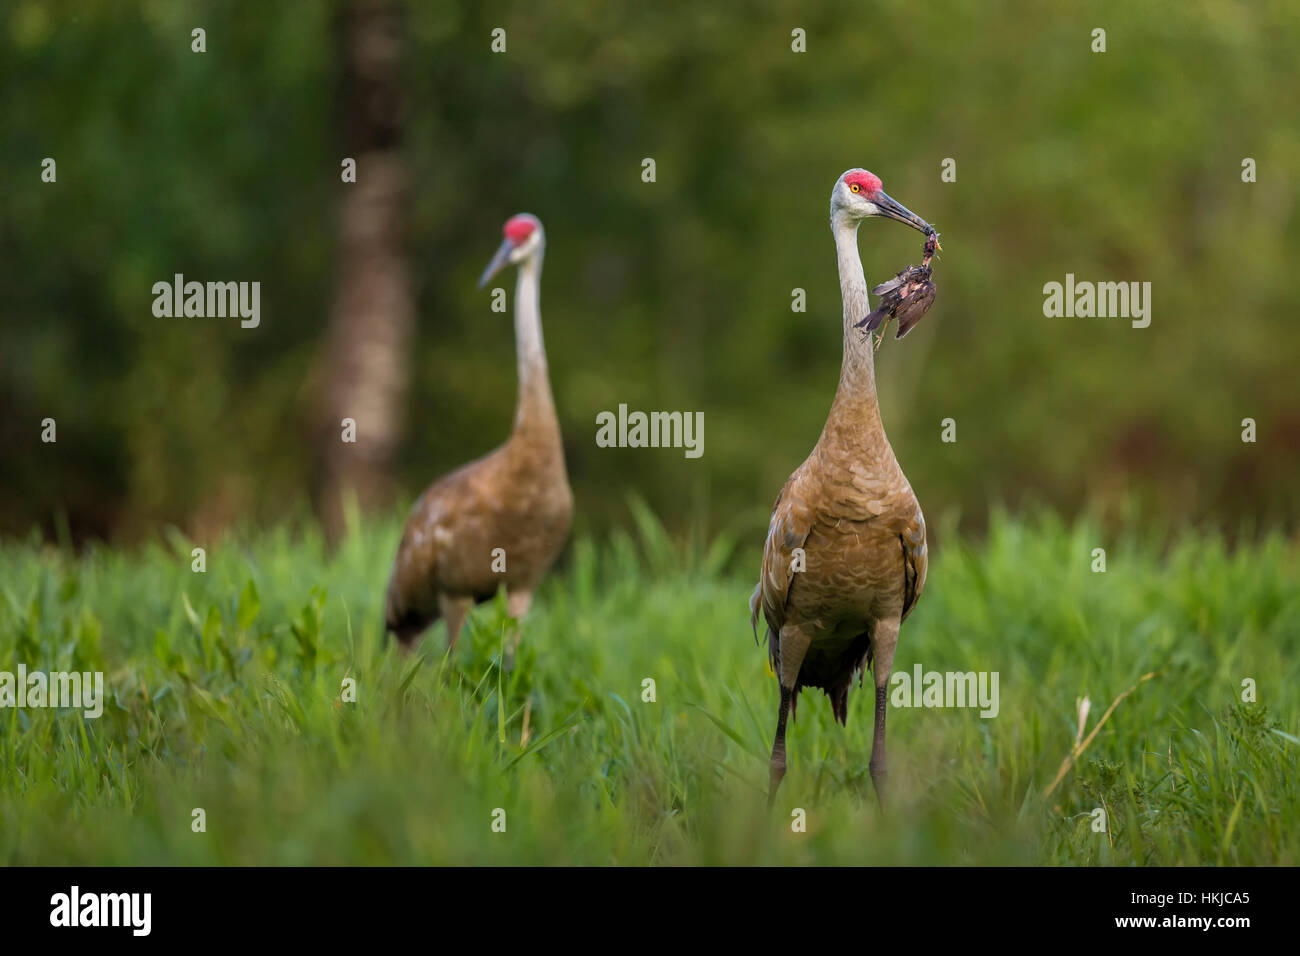 Sandhill cranes - one adult holding a red-winged blackbird that it had killed for food. Stock Photo